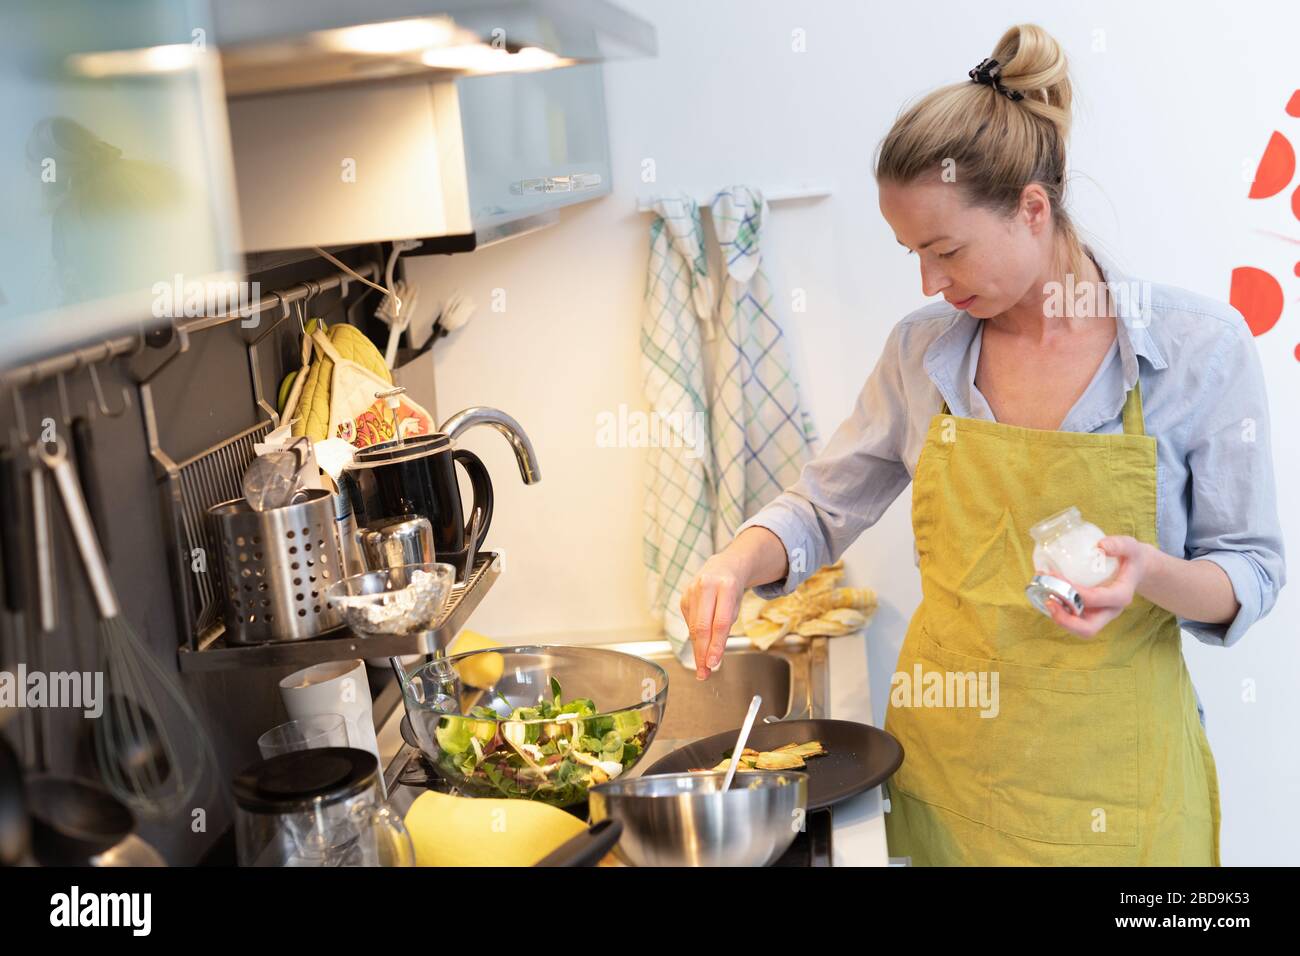 Stay at home housewife woman cooking in kitchen, salting dish in a saucepan, preparing food for family dinner. Stock Photo